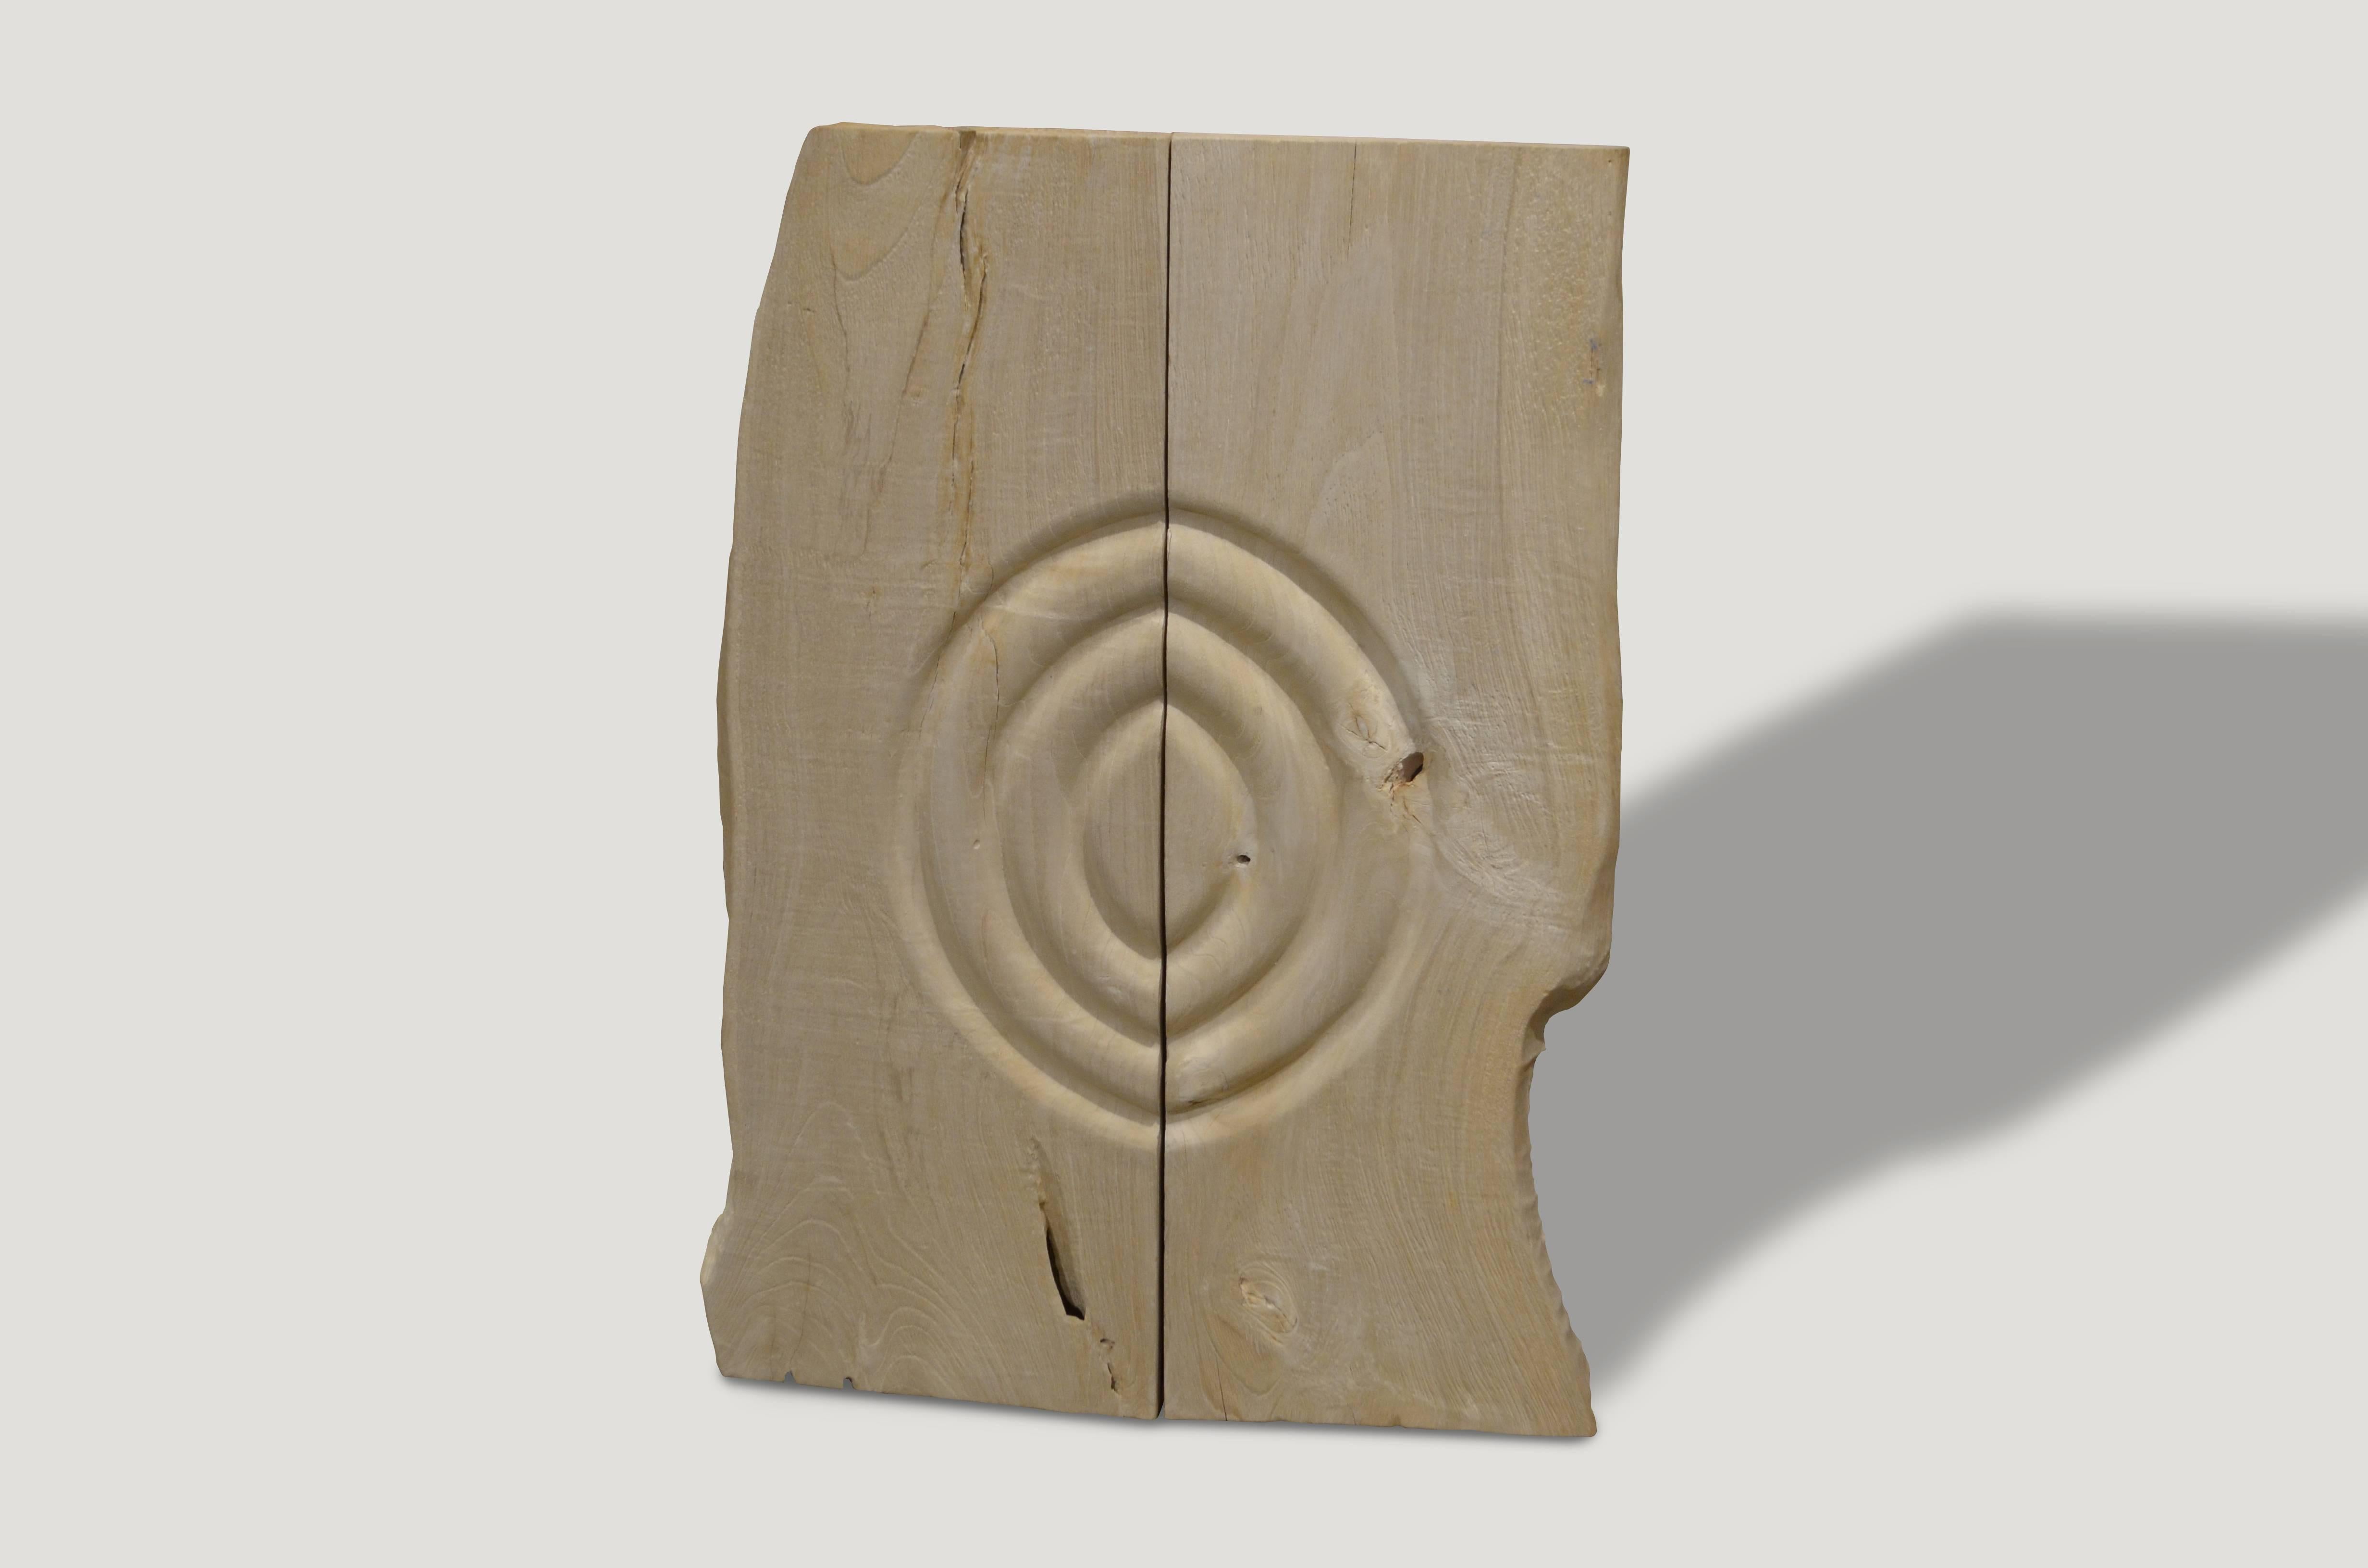 Bleached reclaimed teak wood panel. Hand carved minimalist circle with a natural live edge. Beautiful hanging on a wall vertical or horizontal, together or with a space between. Organic is the new modern.

The St. Barts collection features an